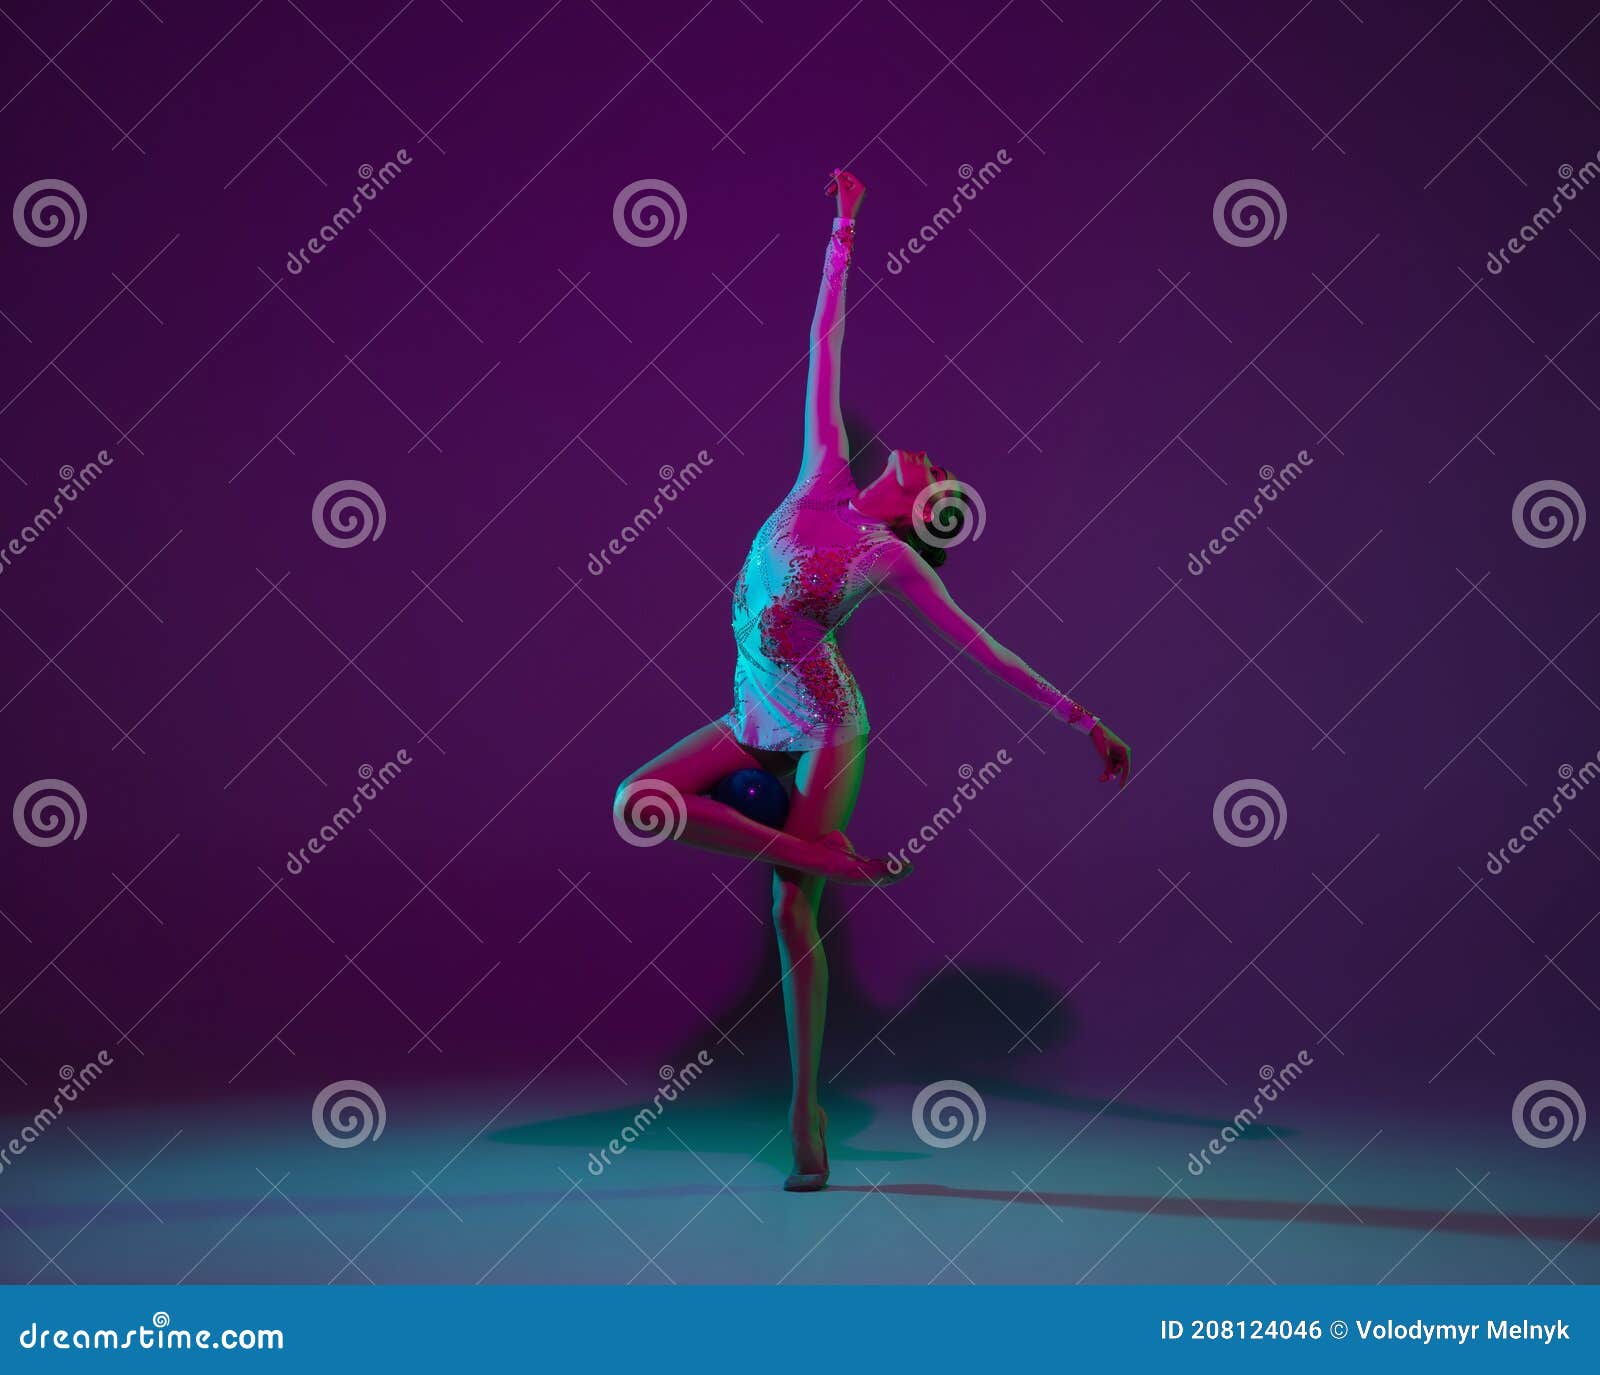 young female athlete, rhythmic gymnastics artist on purple background with neon light. beautiful girl practicing with